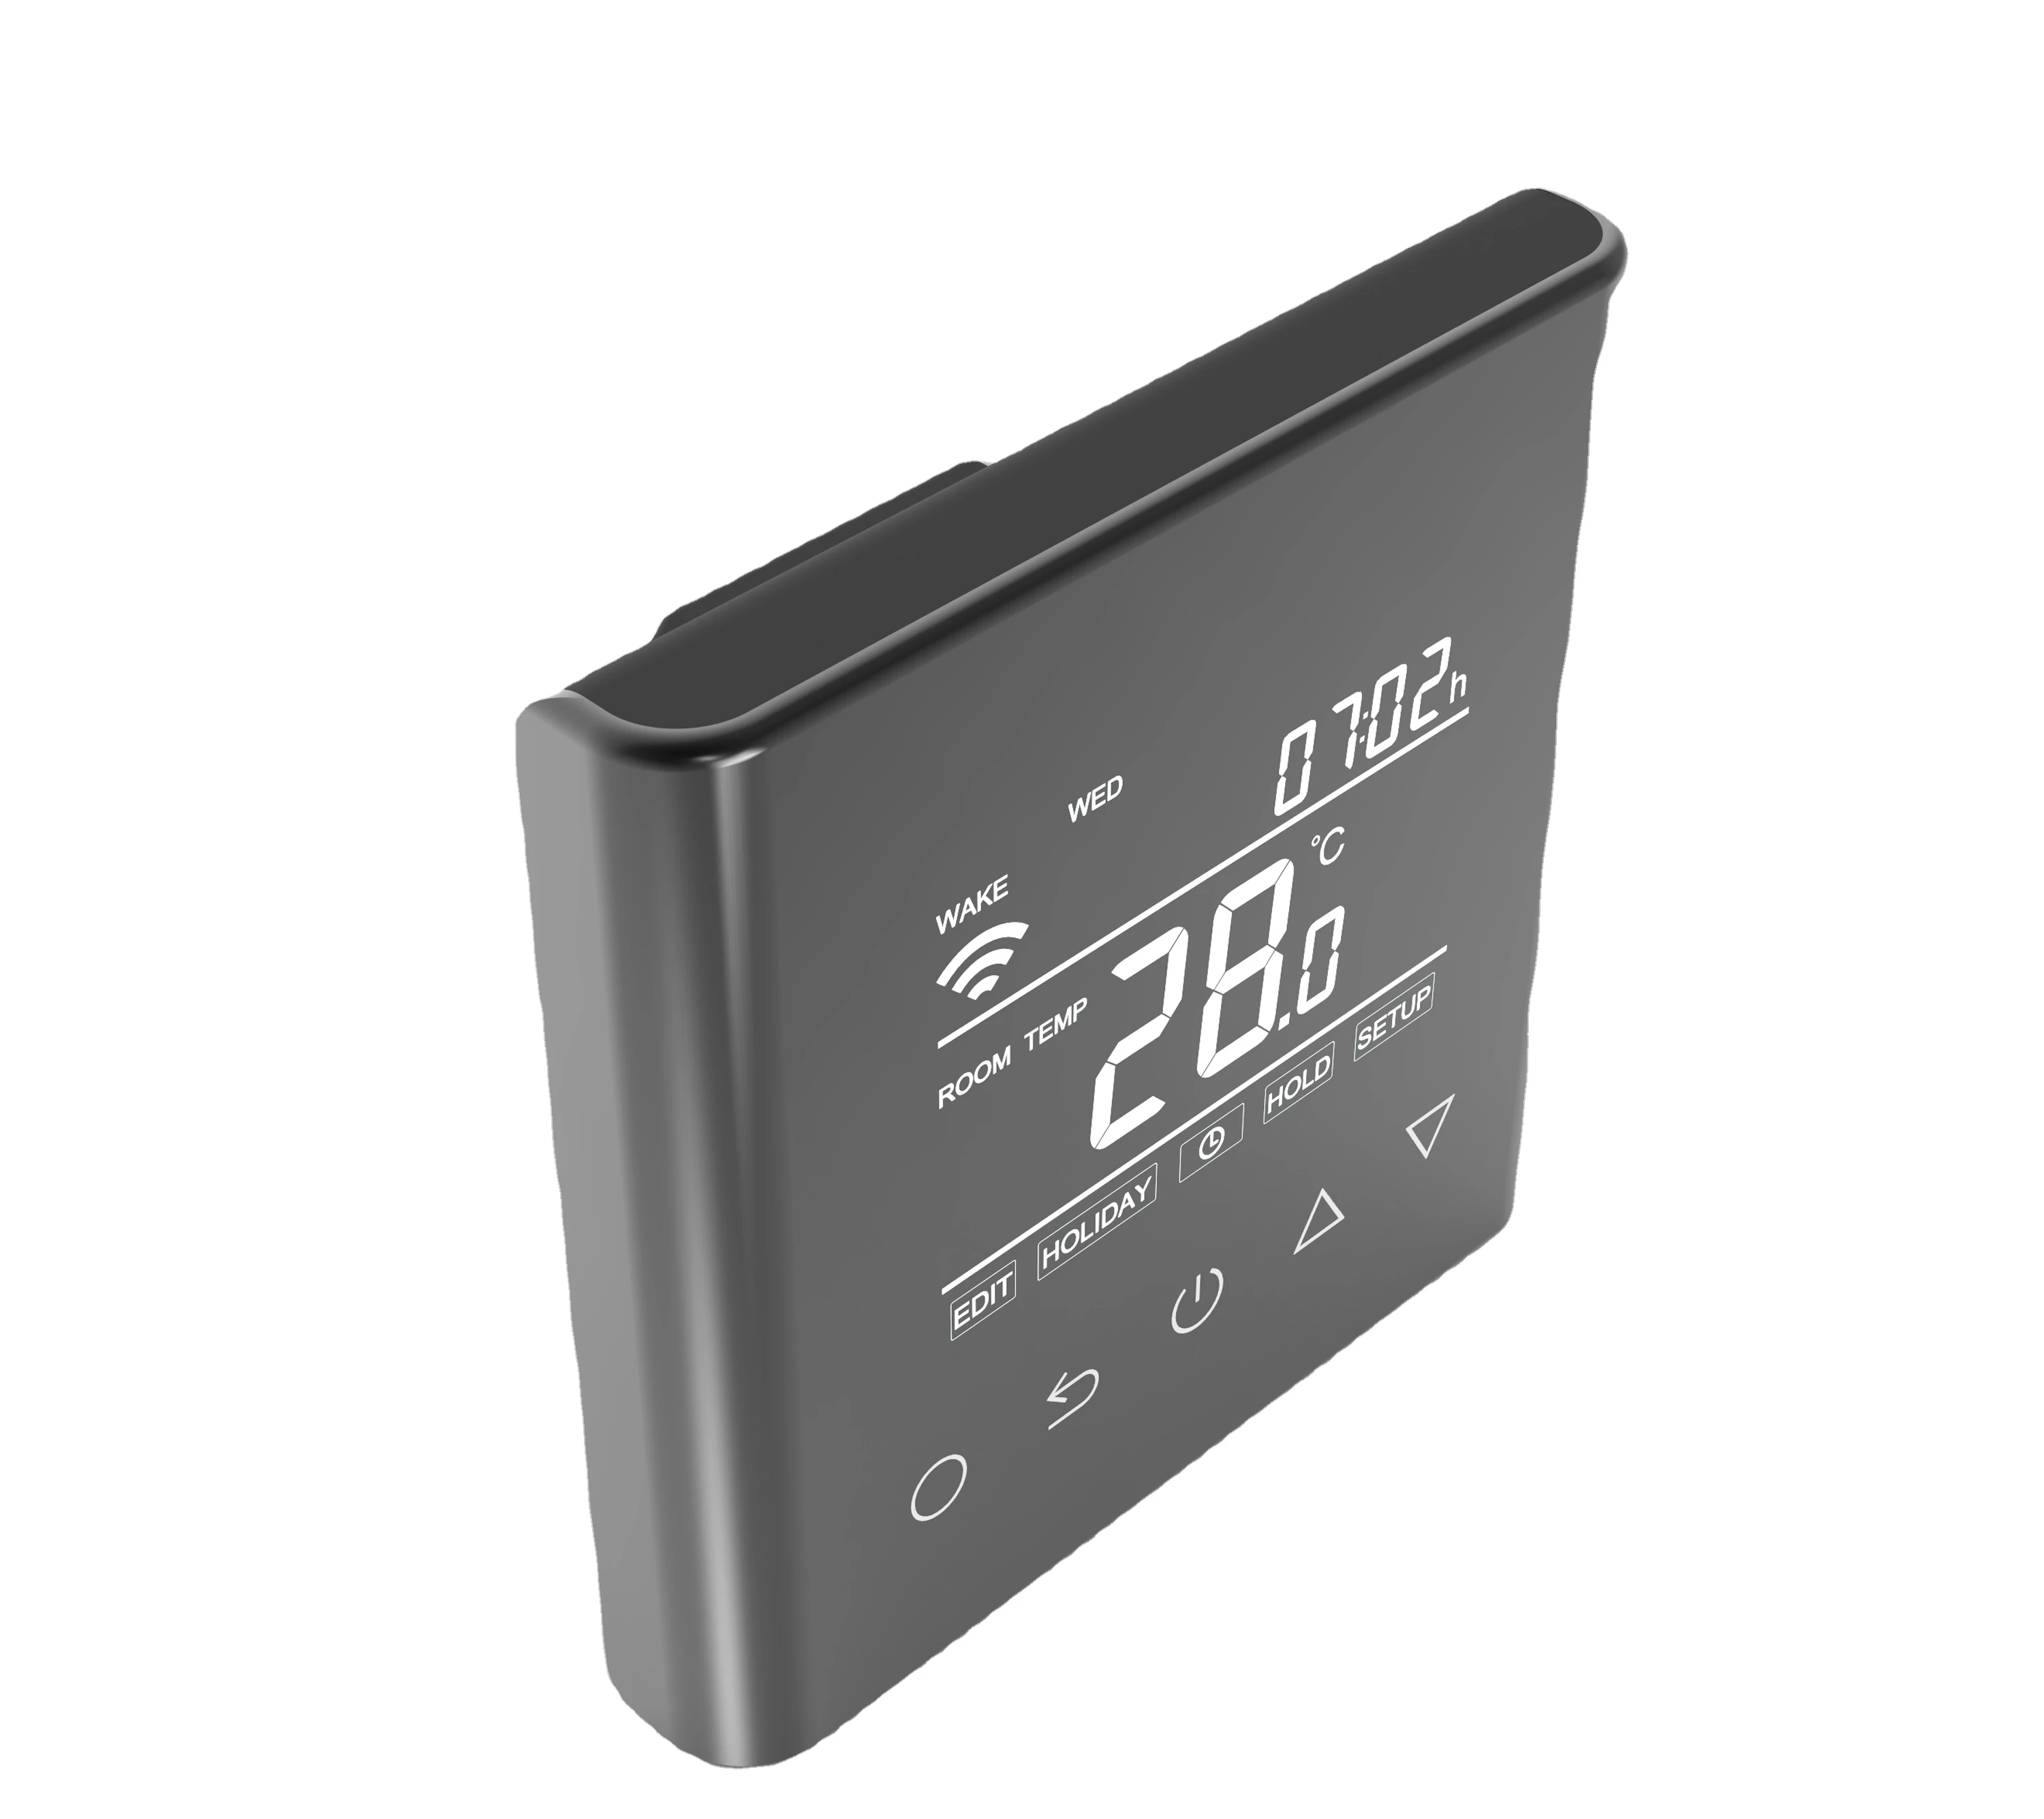 digital thermostat heating temperature controller drive way heating system electic heating termostat